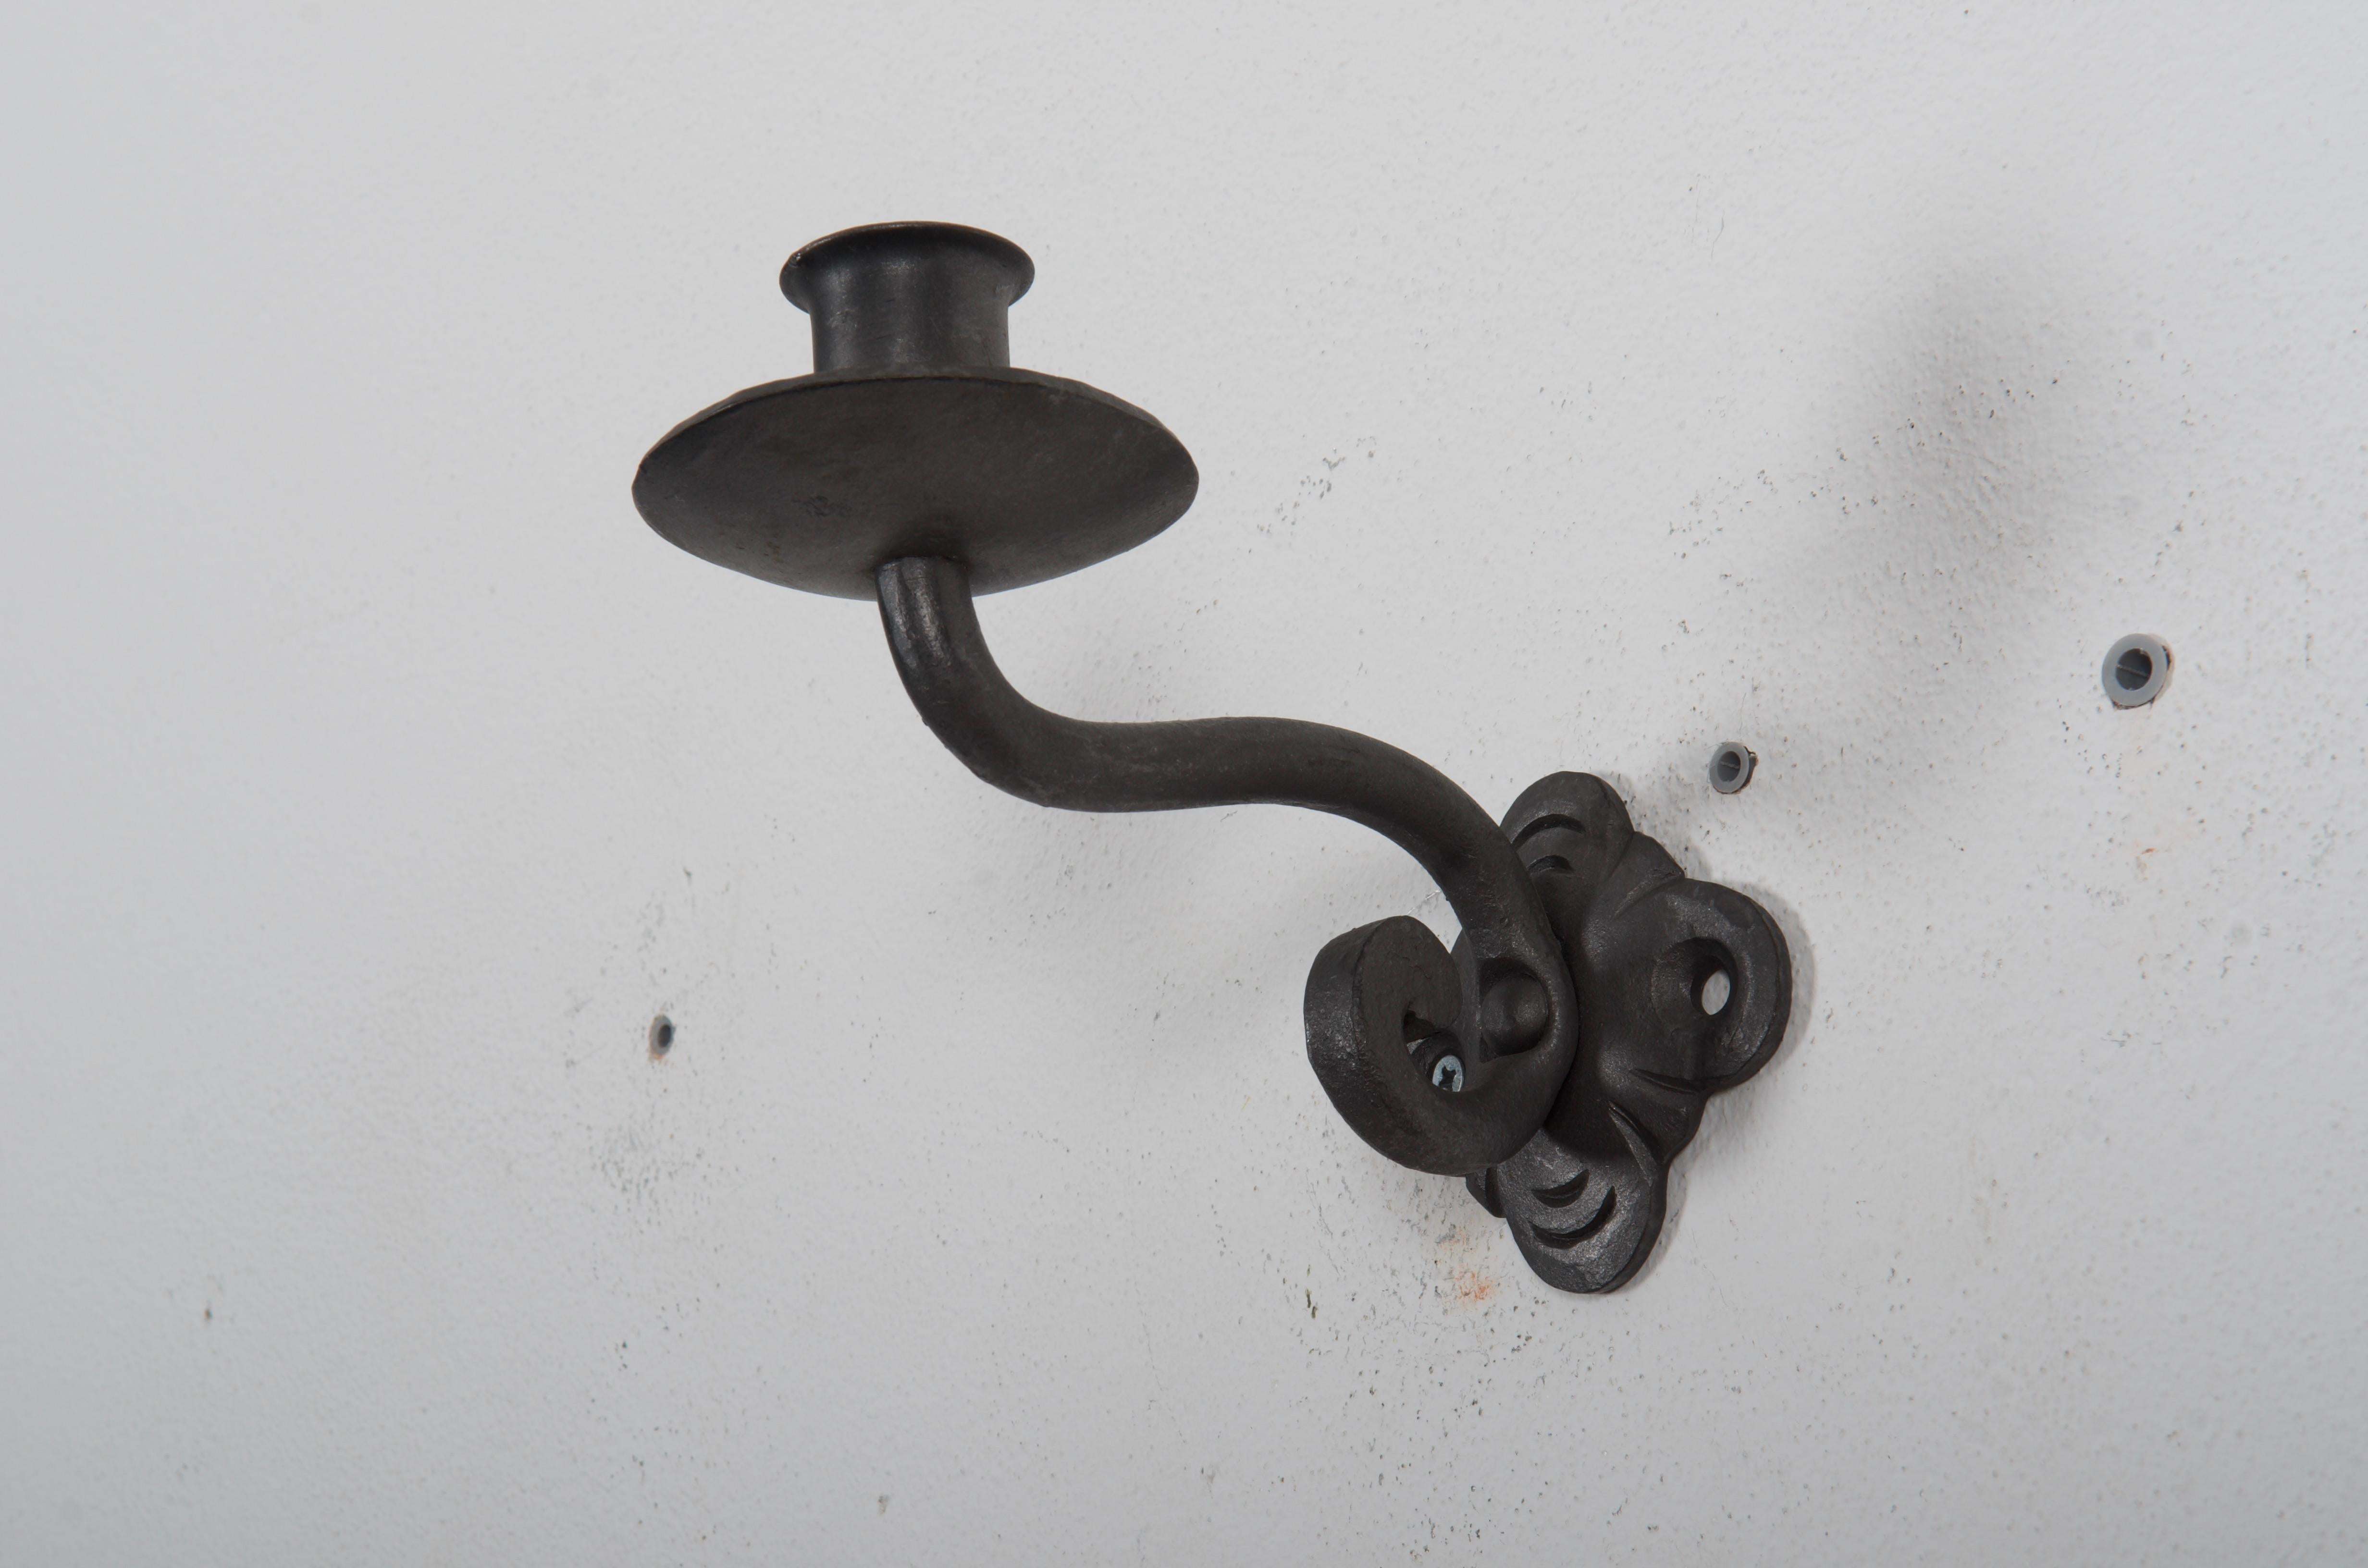 Wrought iron wall candleholder handmade in Styria Austria in the 1950s.